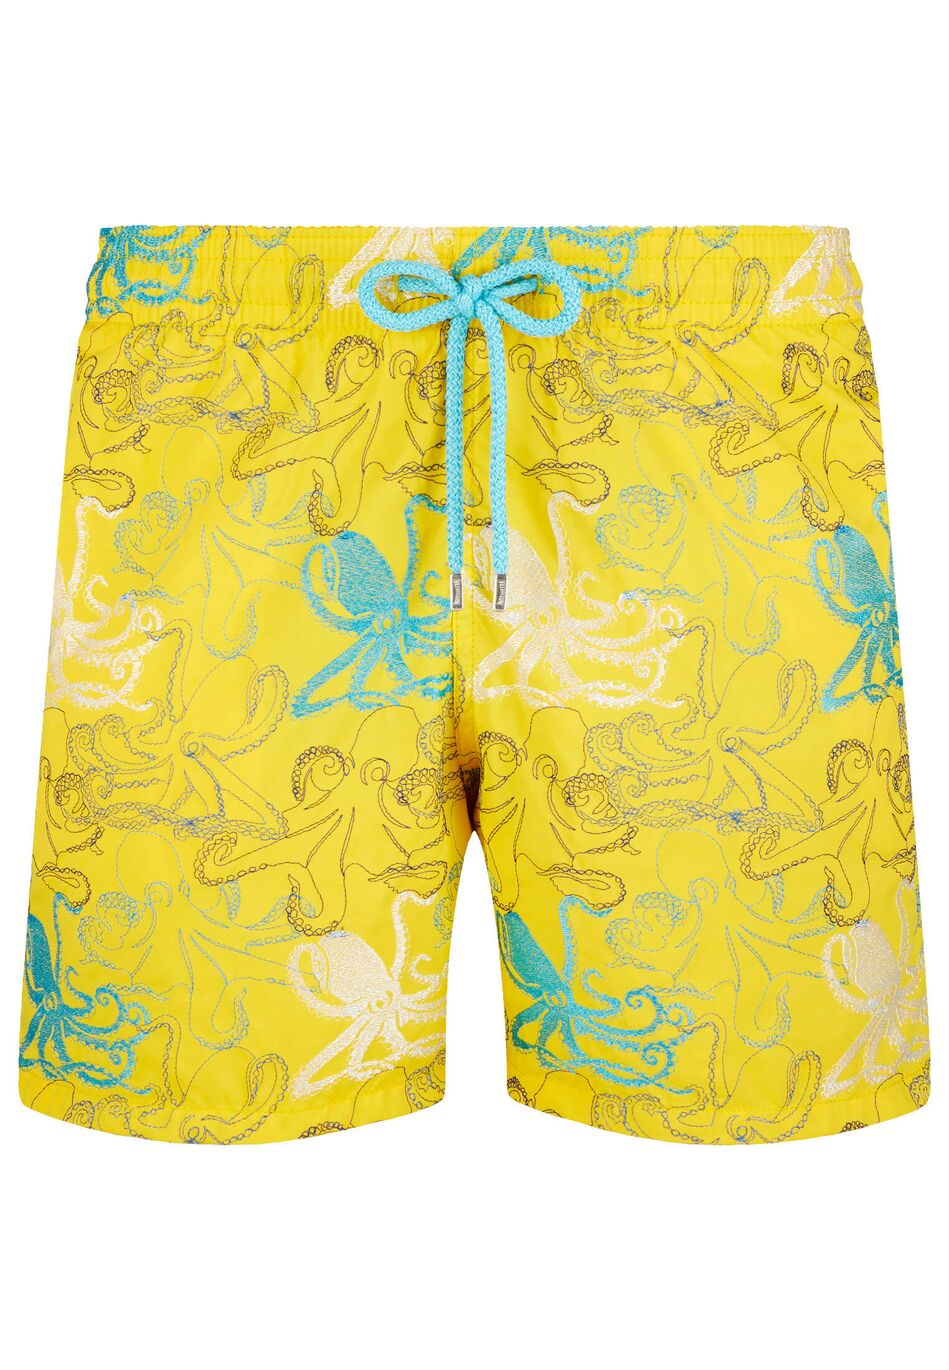 Embroidered Swim Shorts Octopussy - Limited Edition